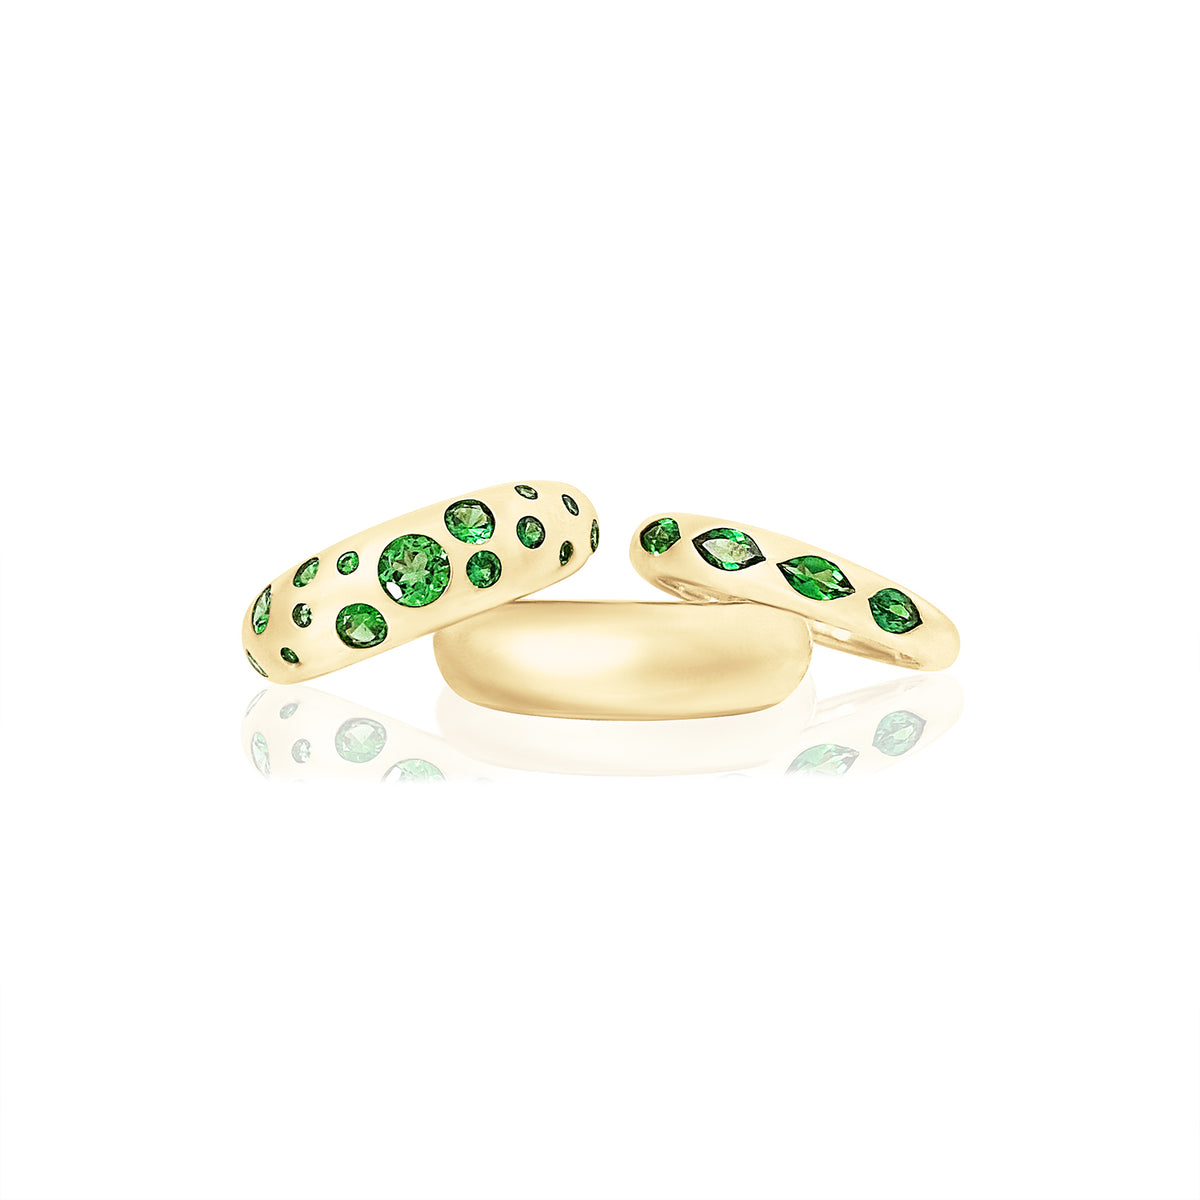 Green Ombré Skinny Nomad Ring - Claudia Mae Jewelry